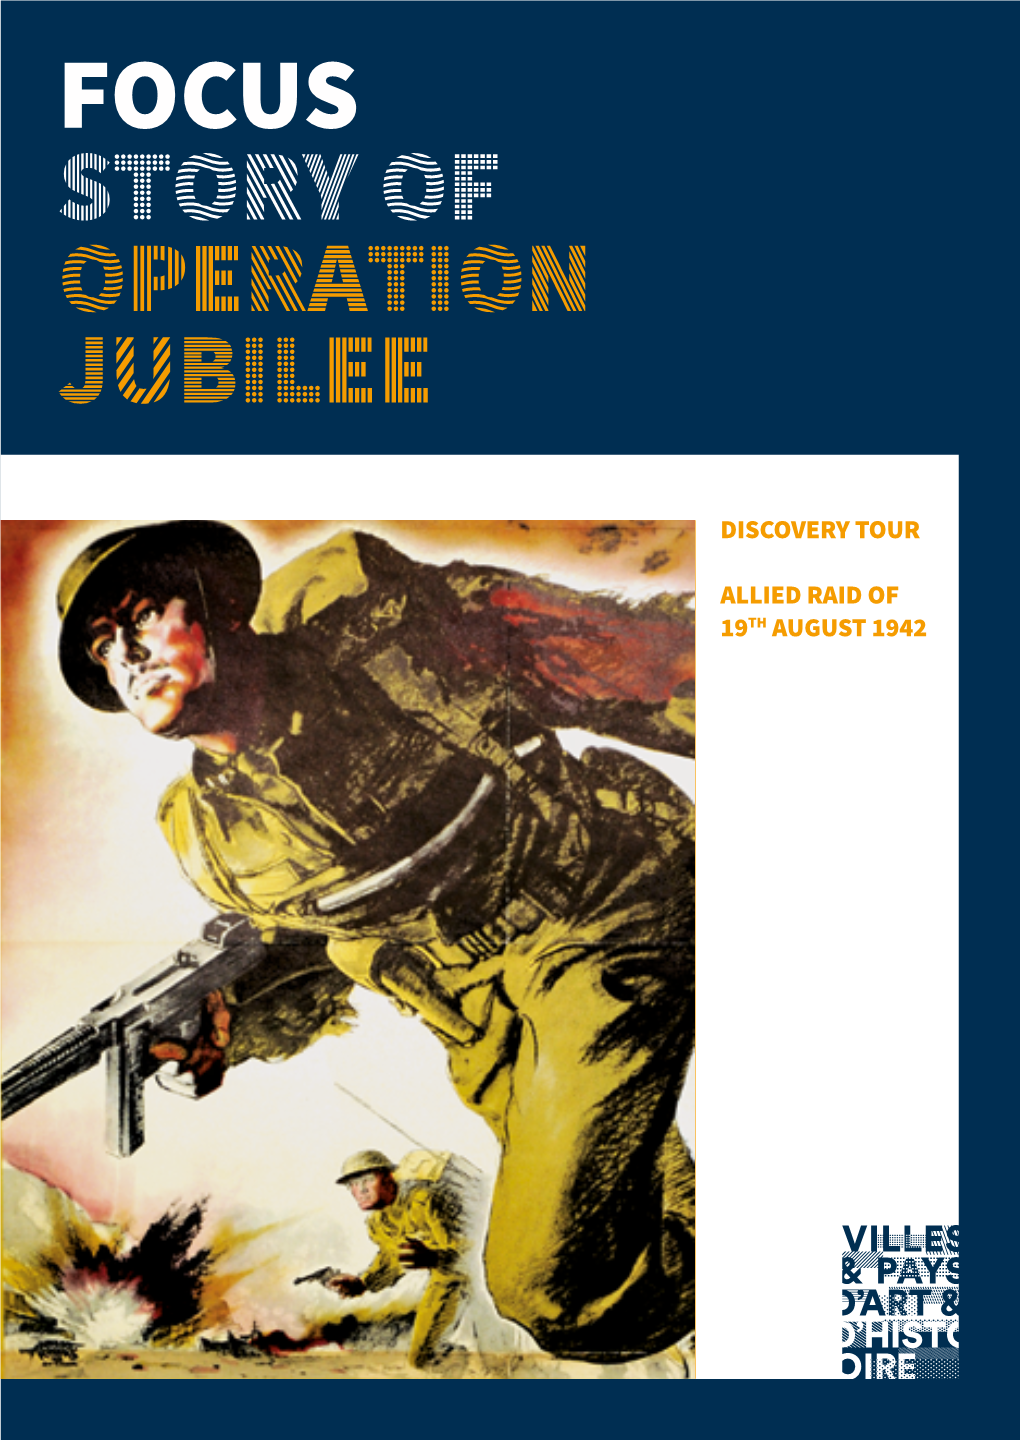 Focus Story of Operation Jubilee